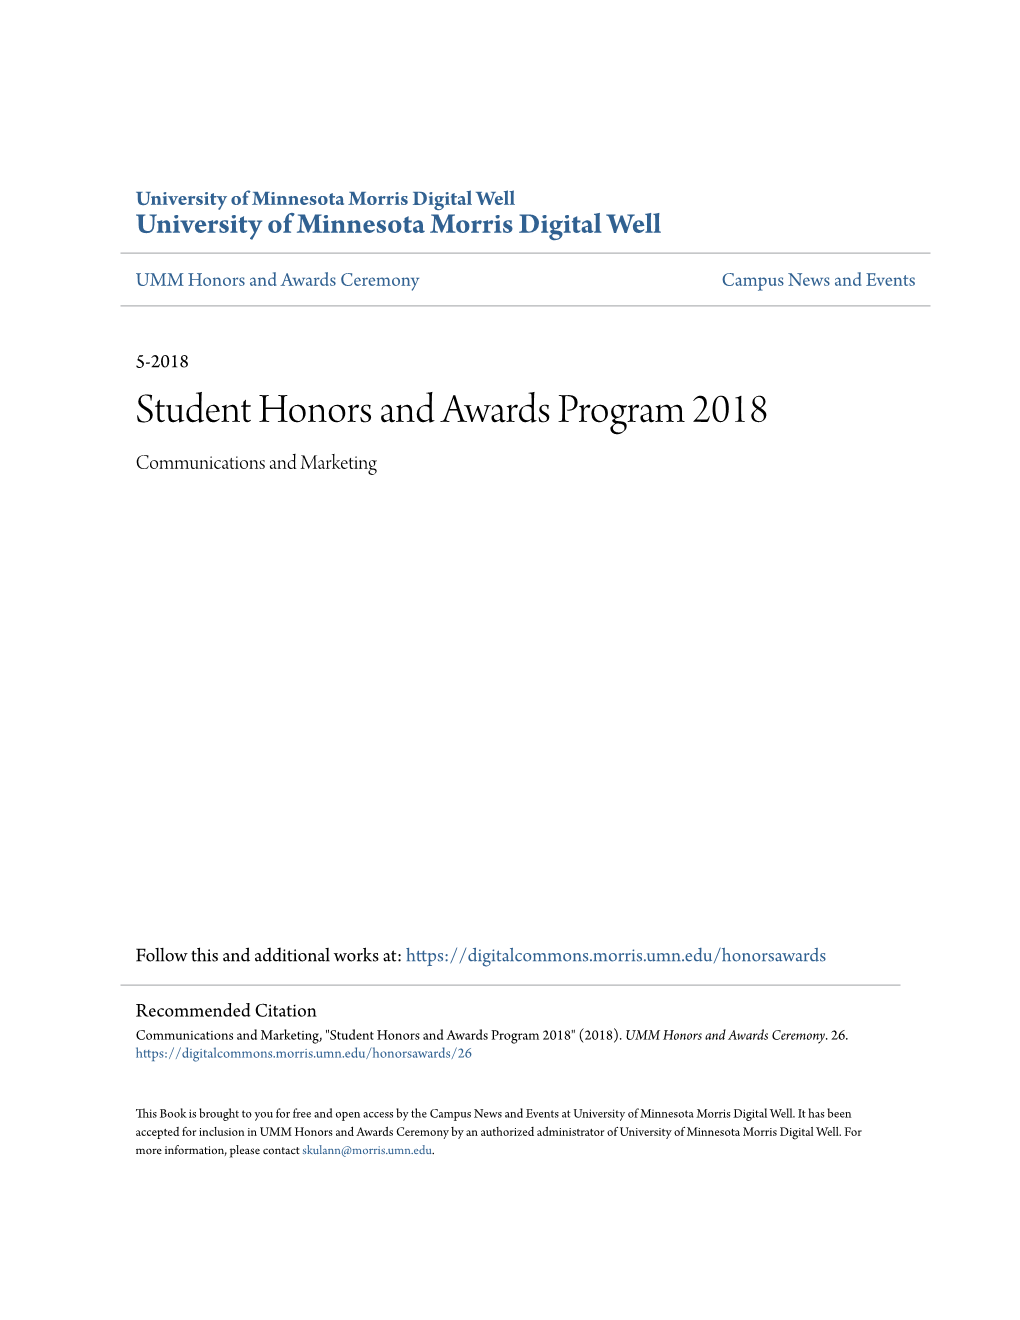 Student Honors and Awards Program 2018 Communications and Marketing